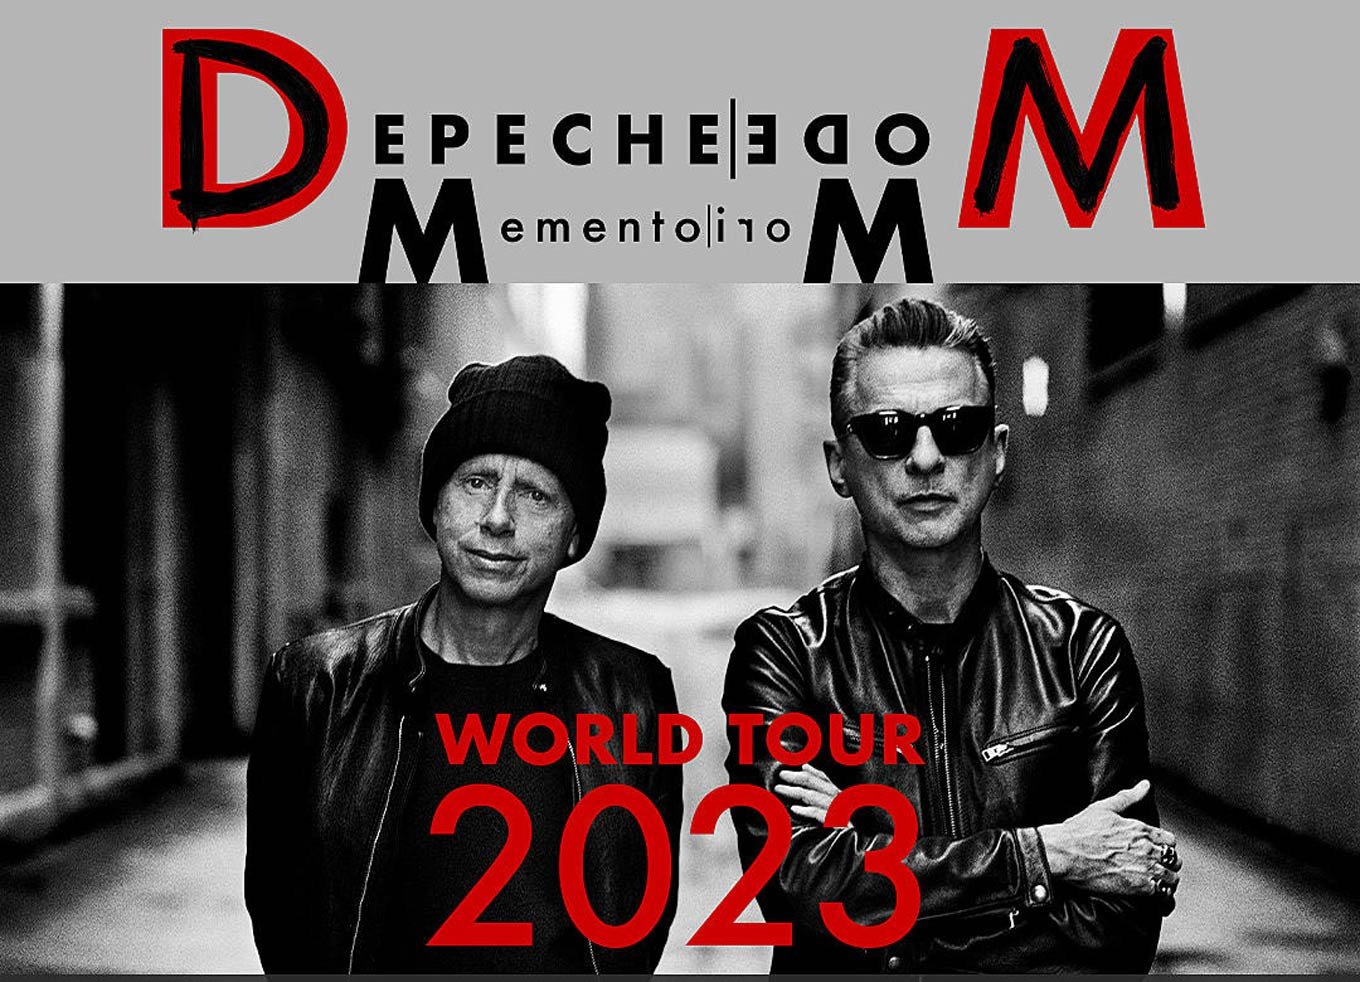 Depeche Mode Share New Album Title and 2023 Tour Dates